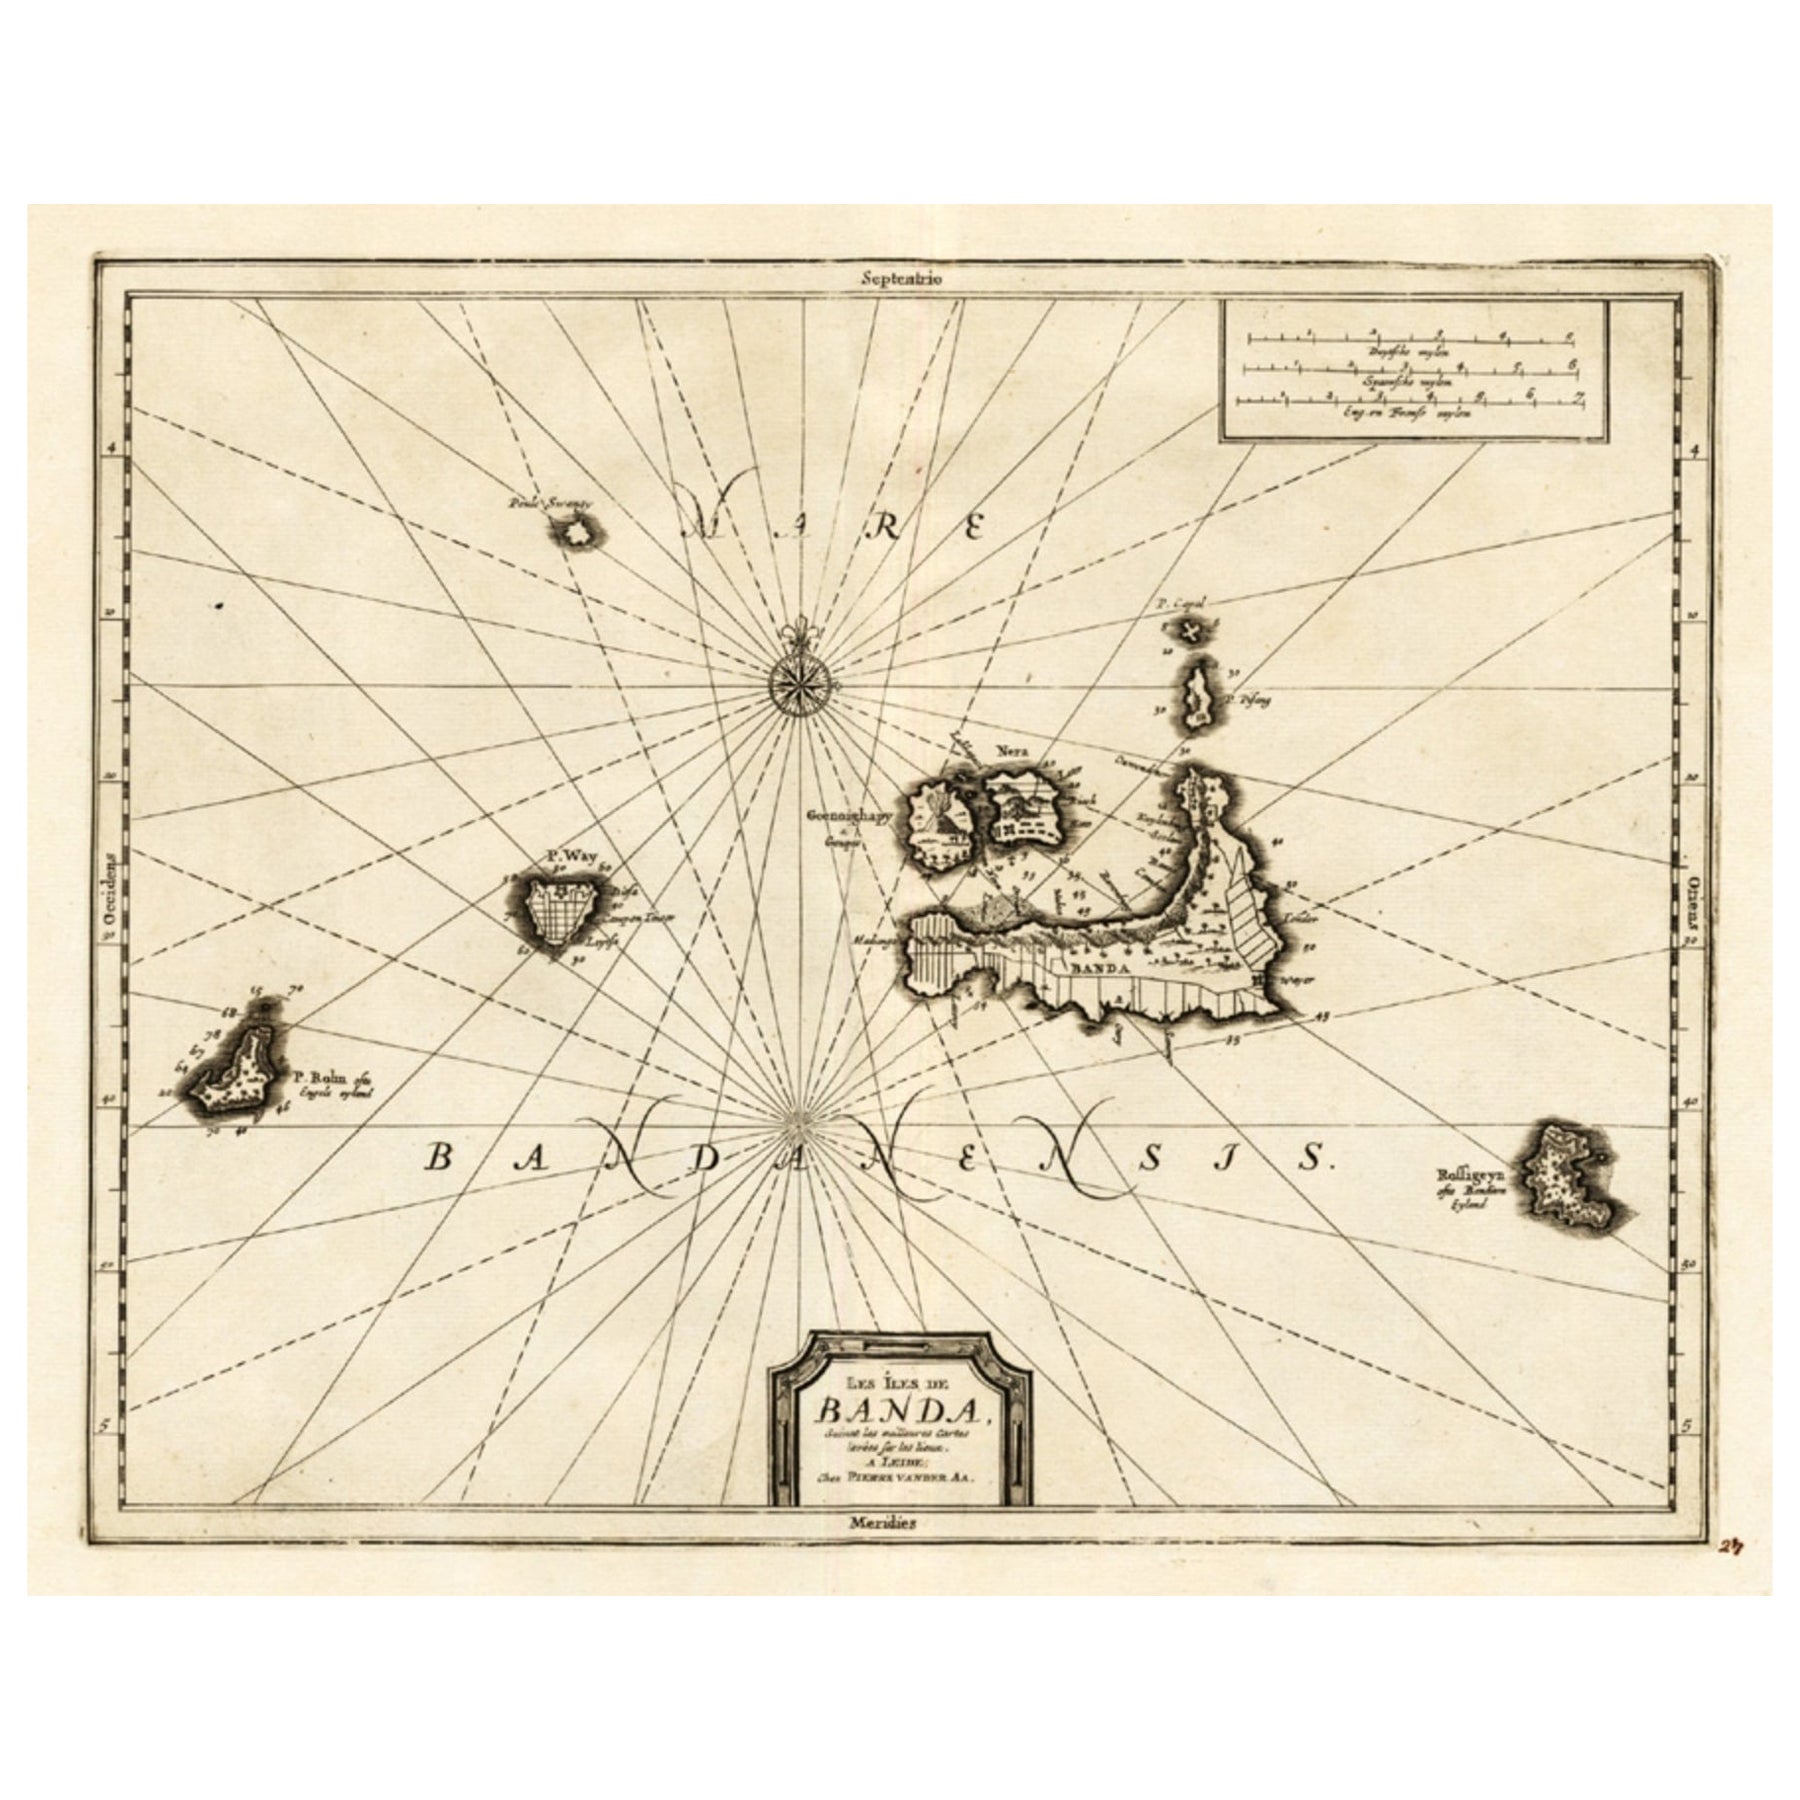 Antique Map of the Islands of Banda, Indonesia from a Very Rare Edition, 1725